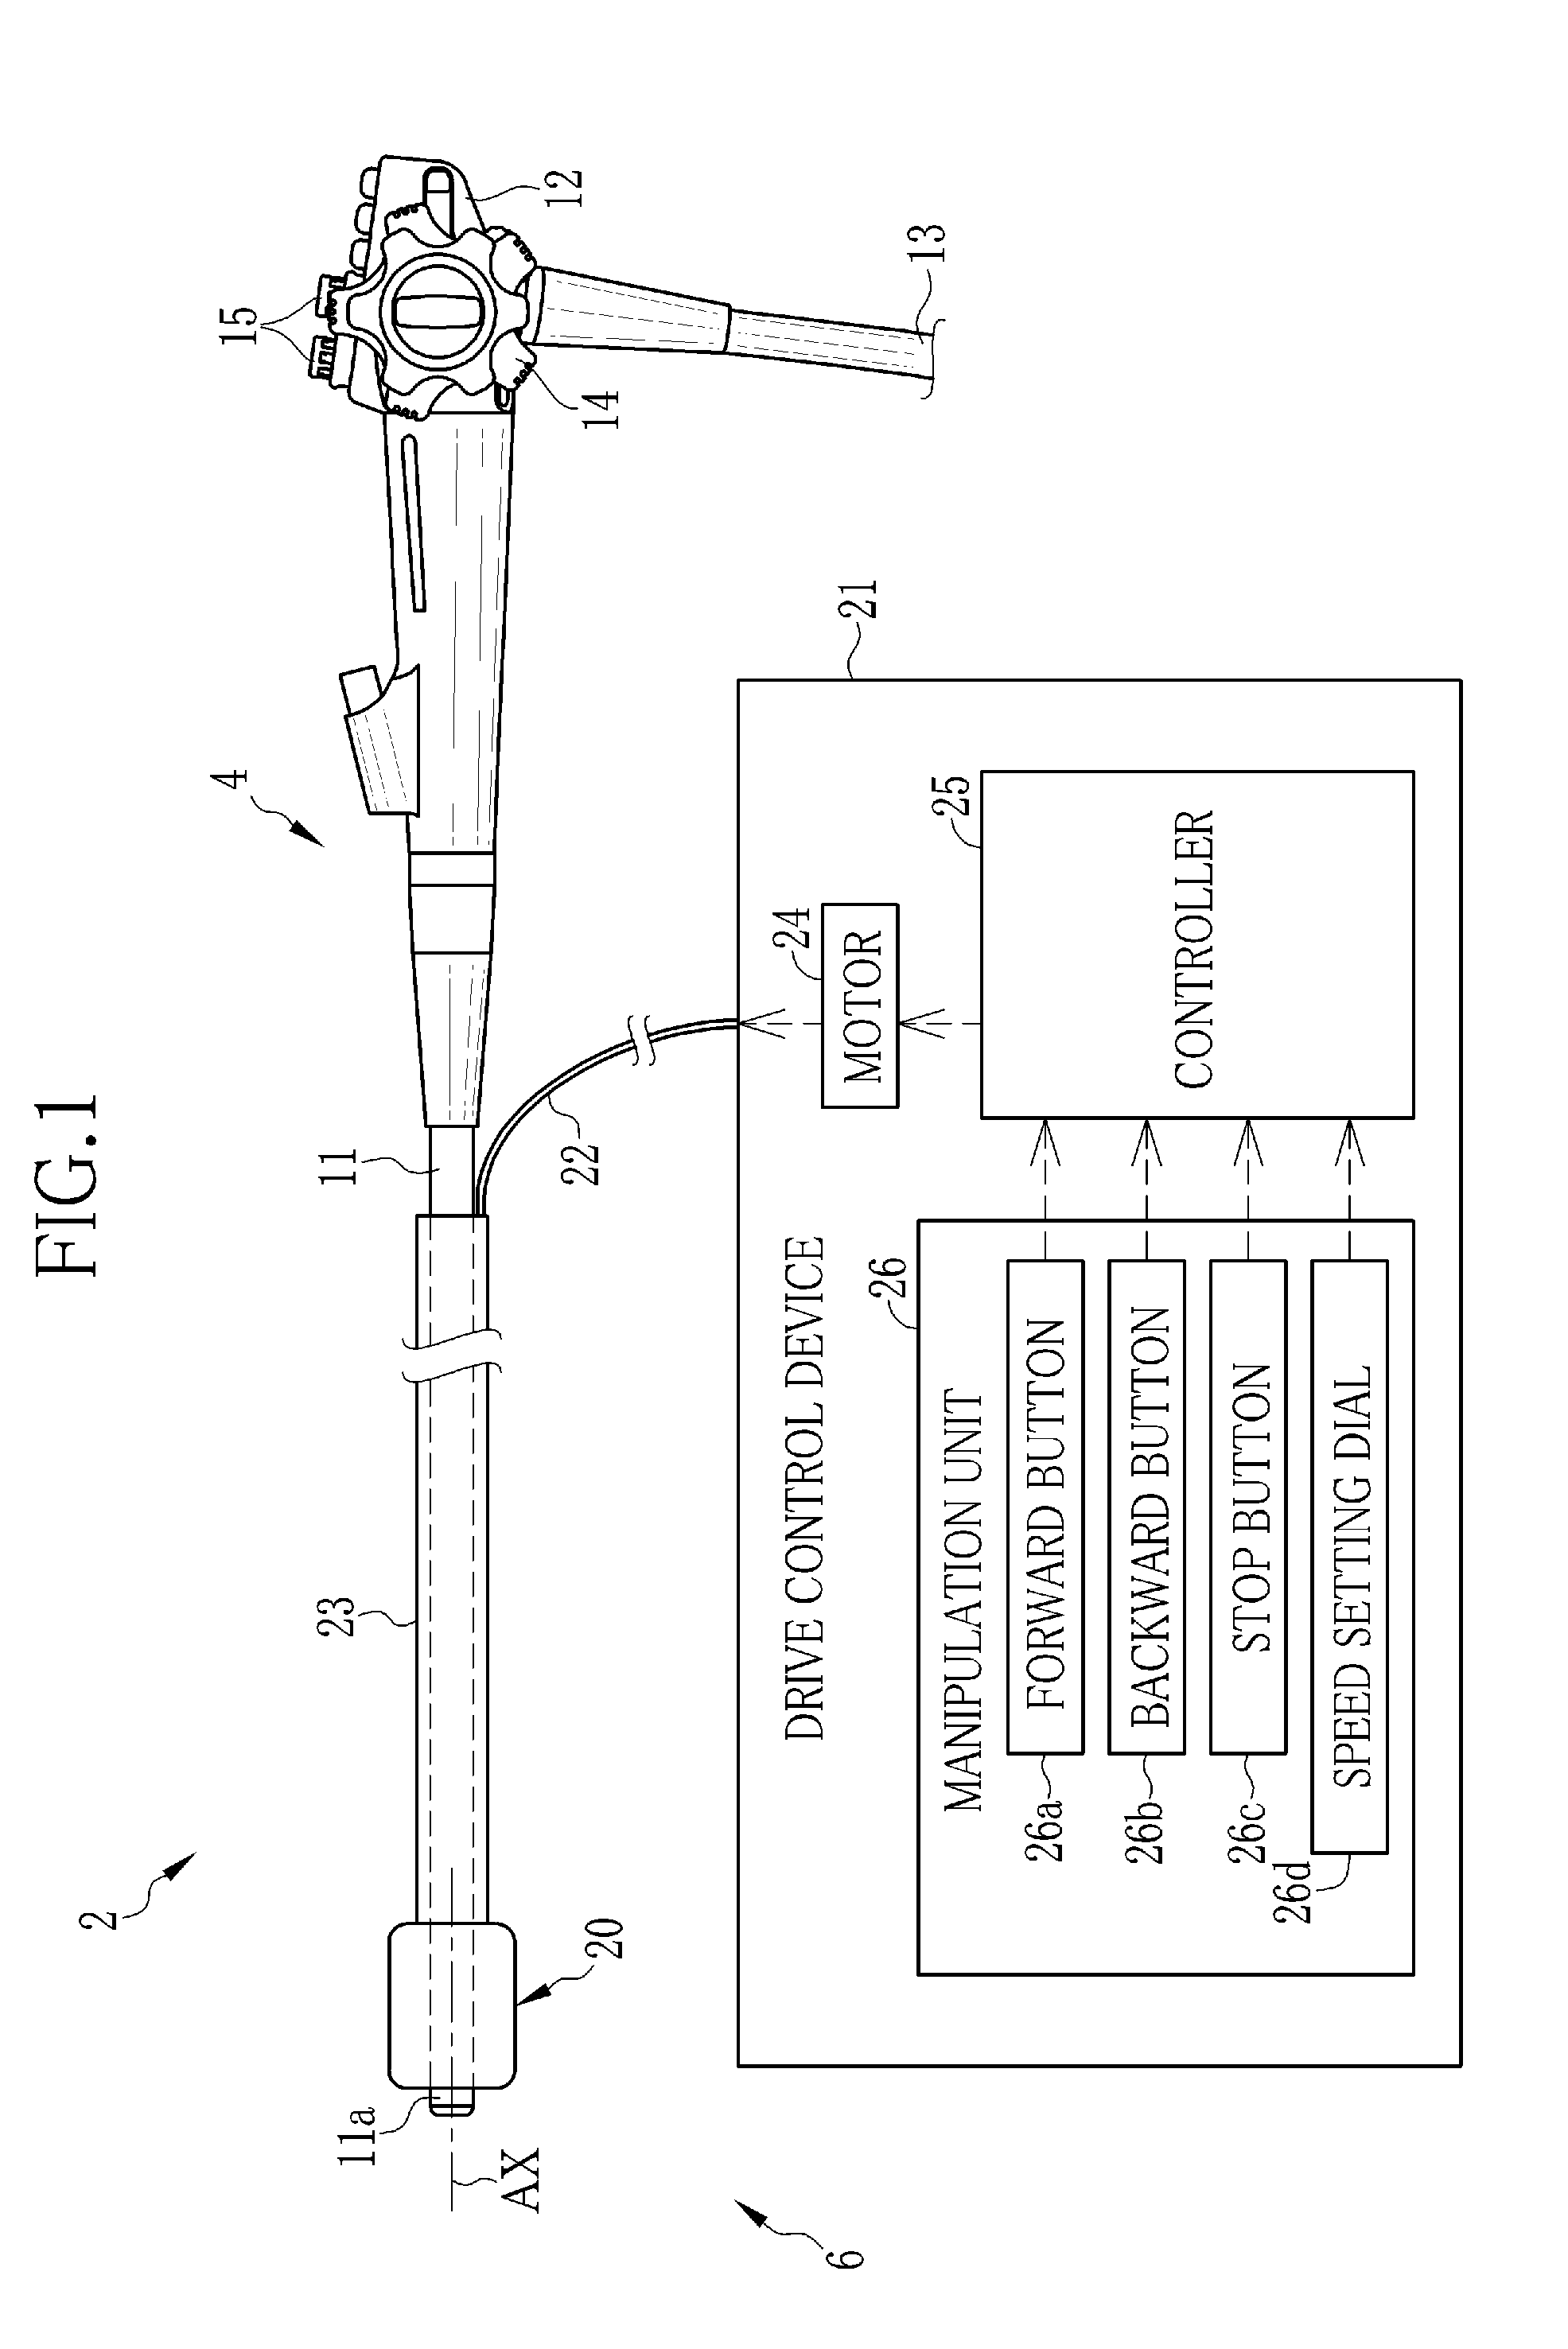 Endoscope insertion assisting device